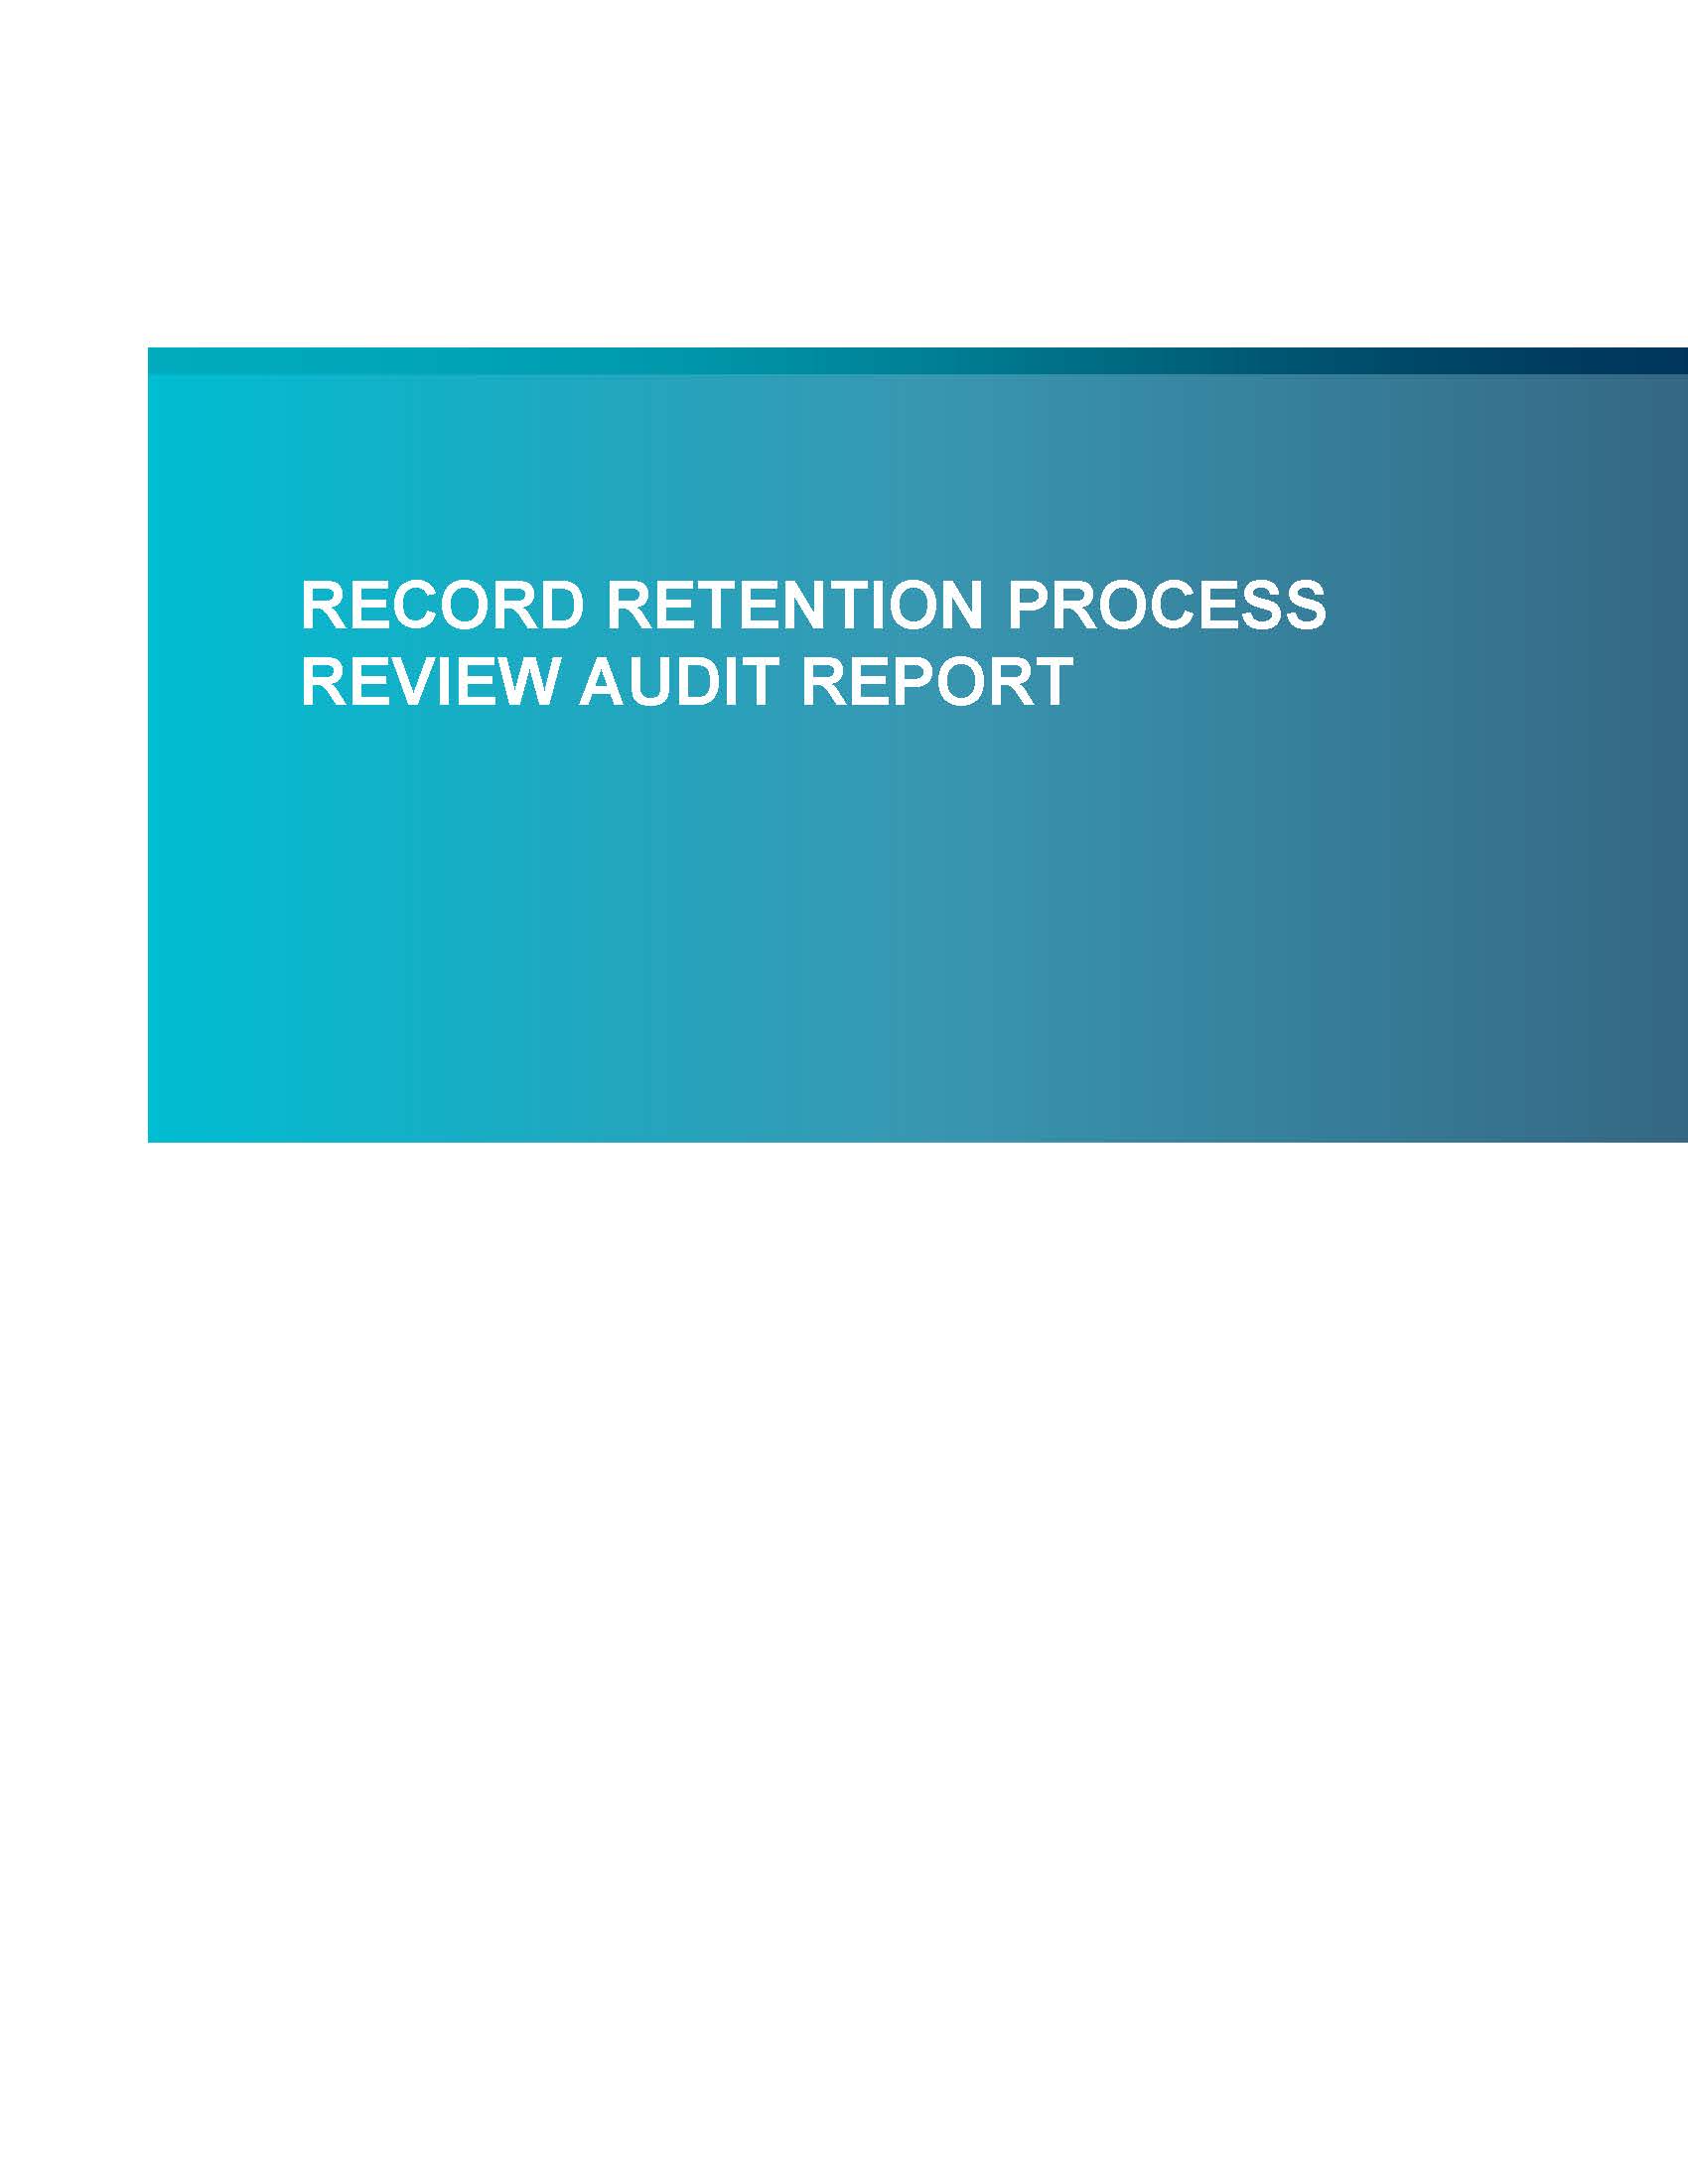 Screenshot of the first page Record Retention Process Review Audit Report.